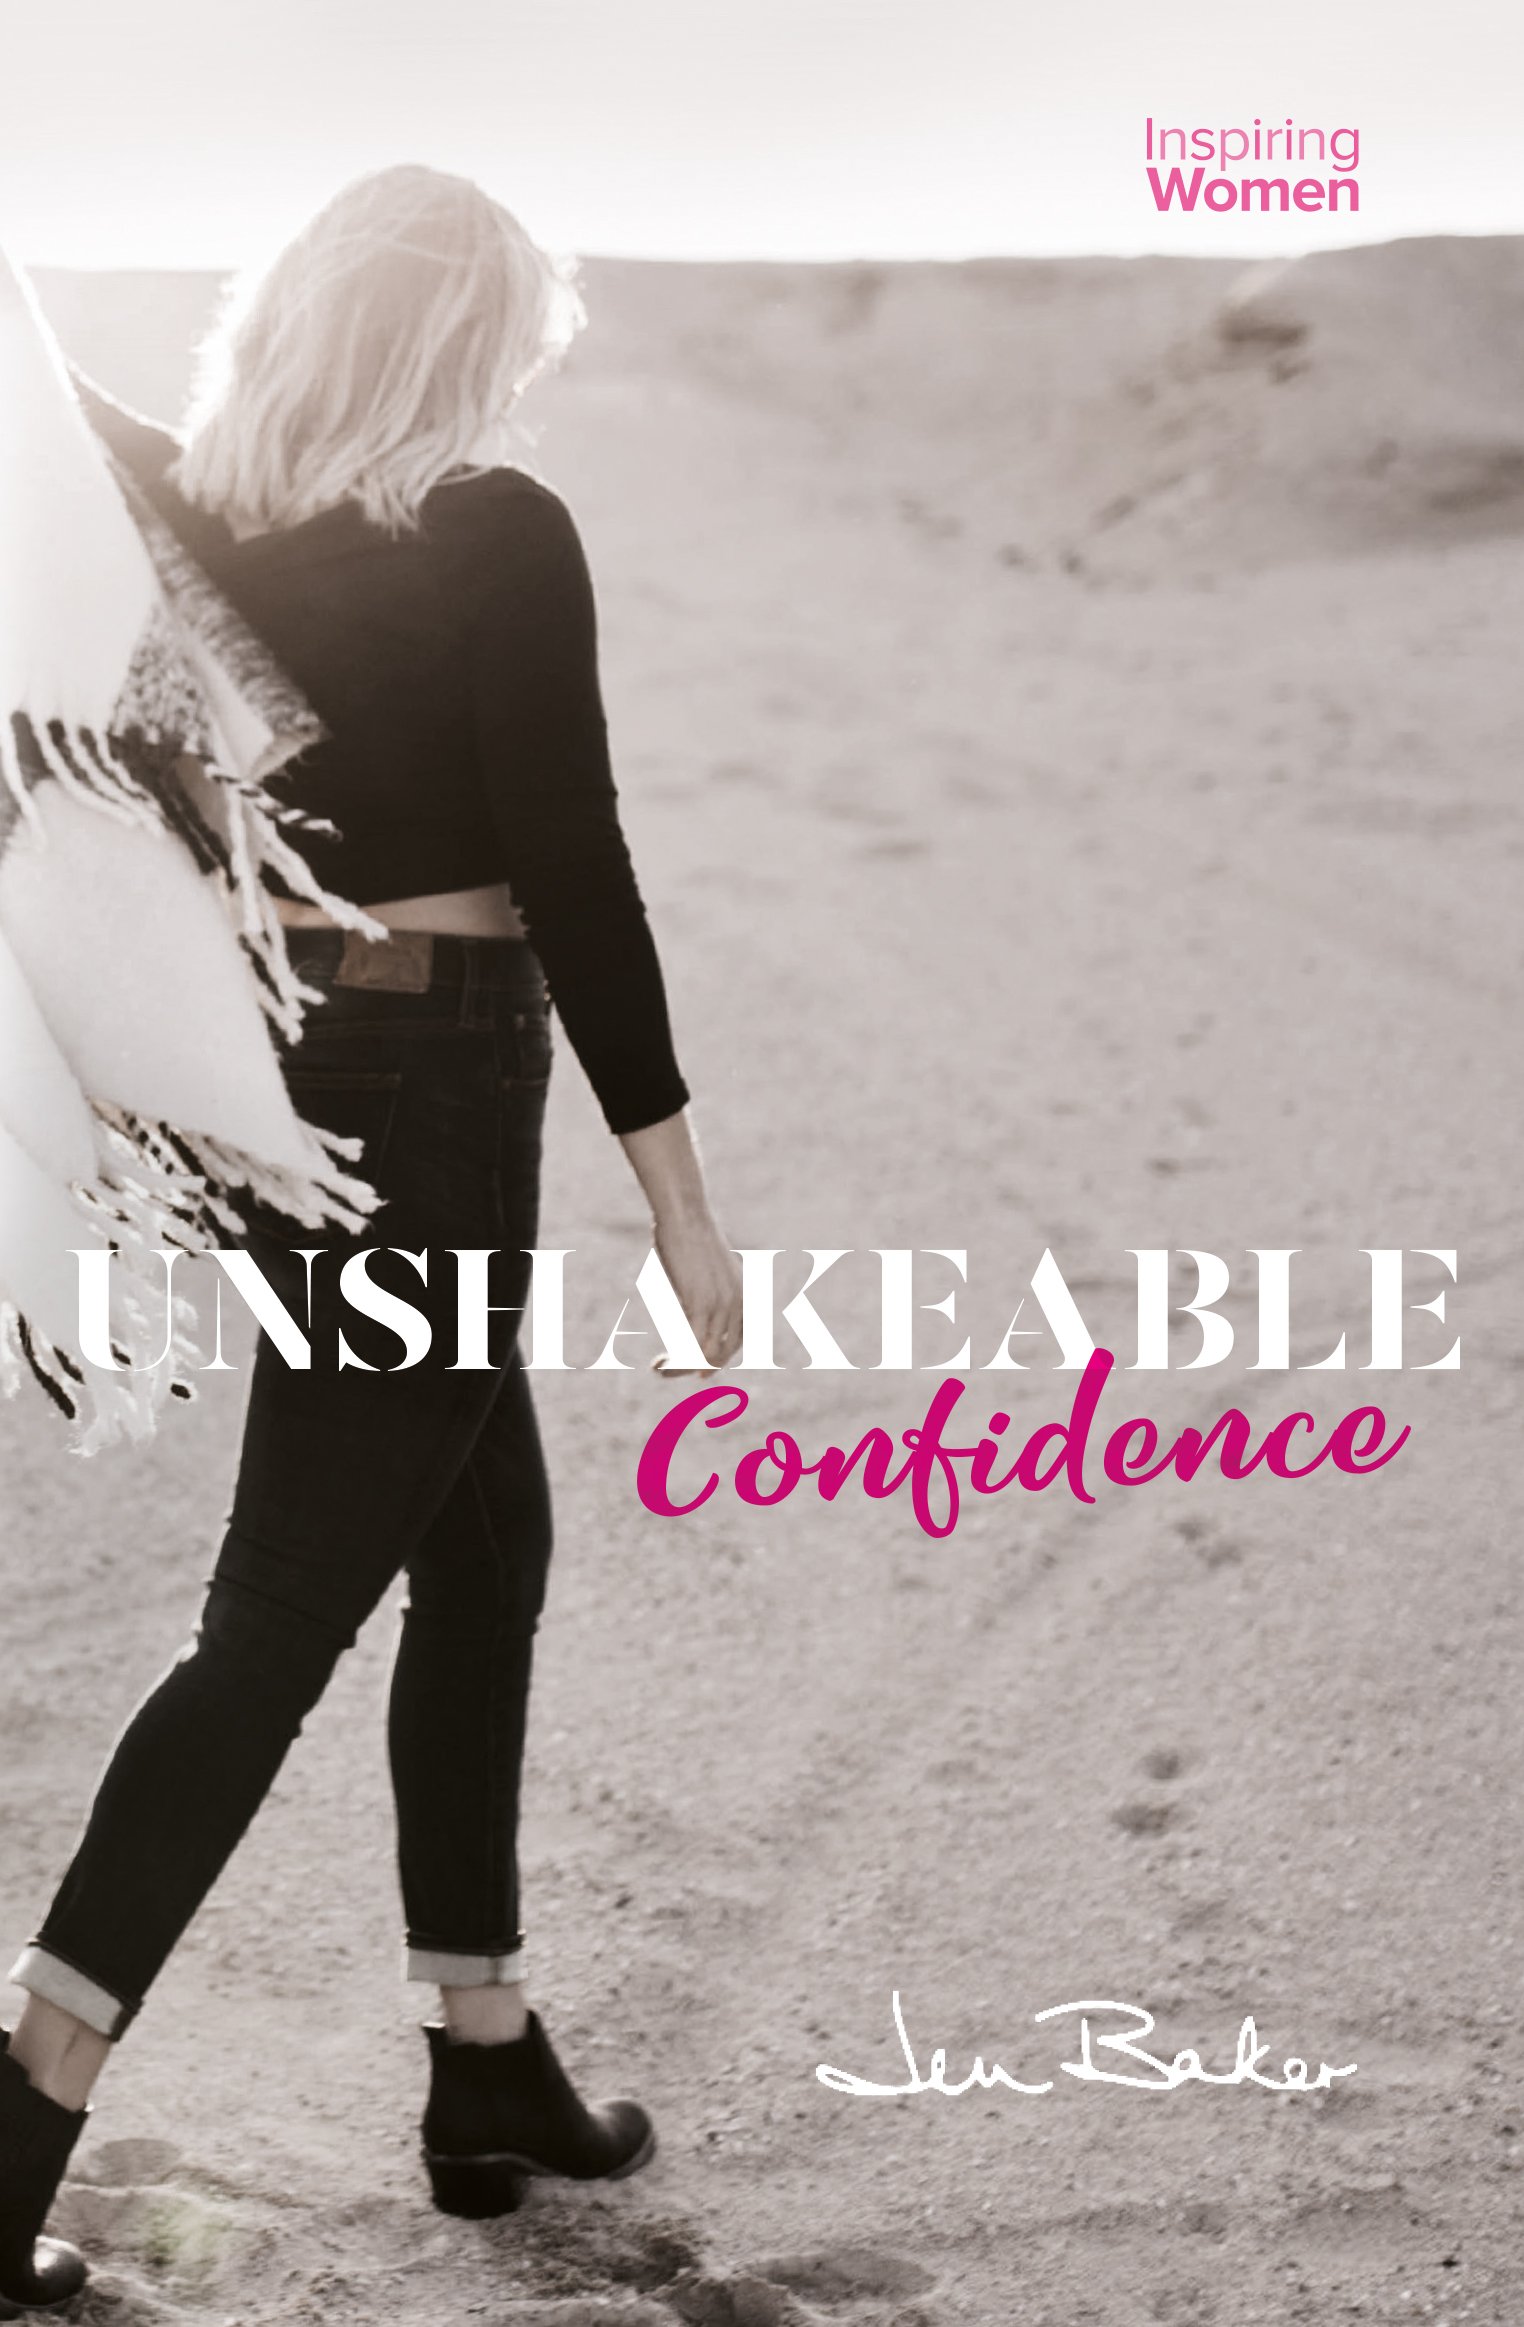 More information on Unshakeable Confidence